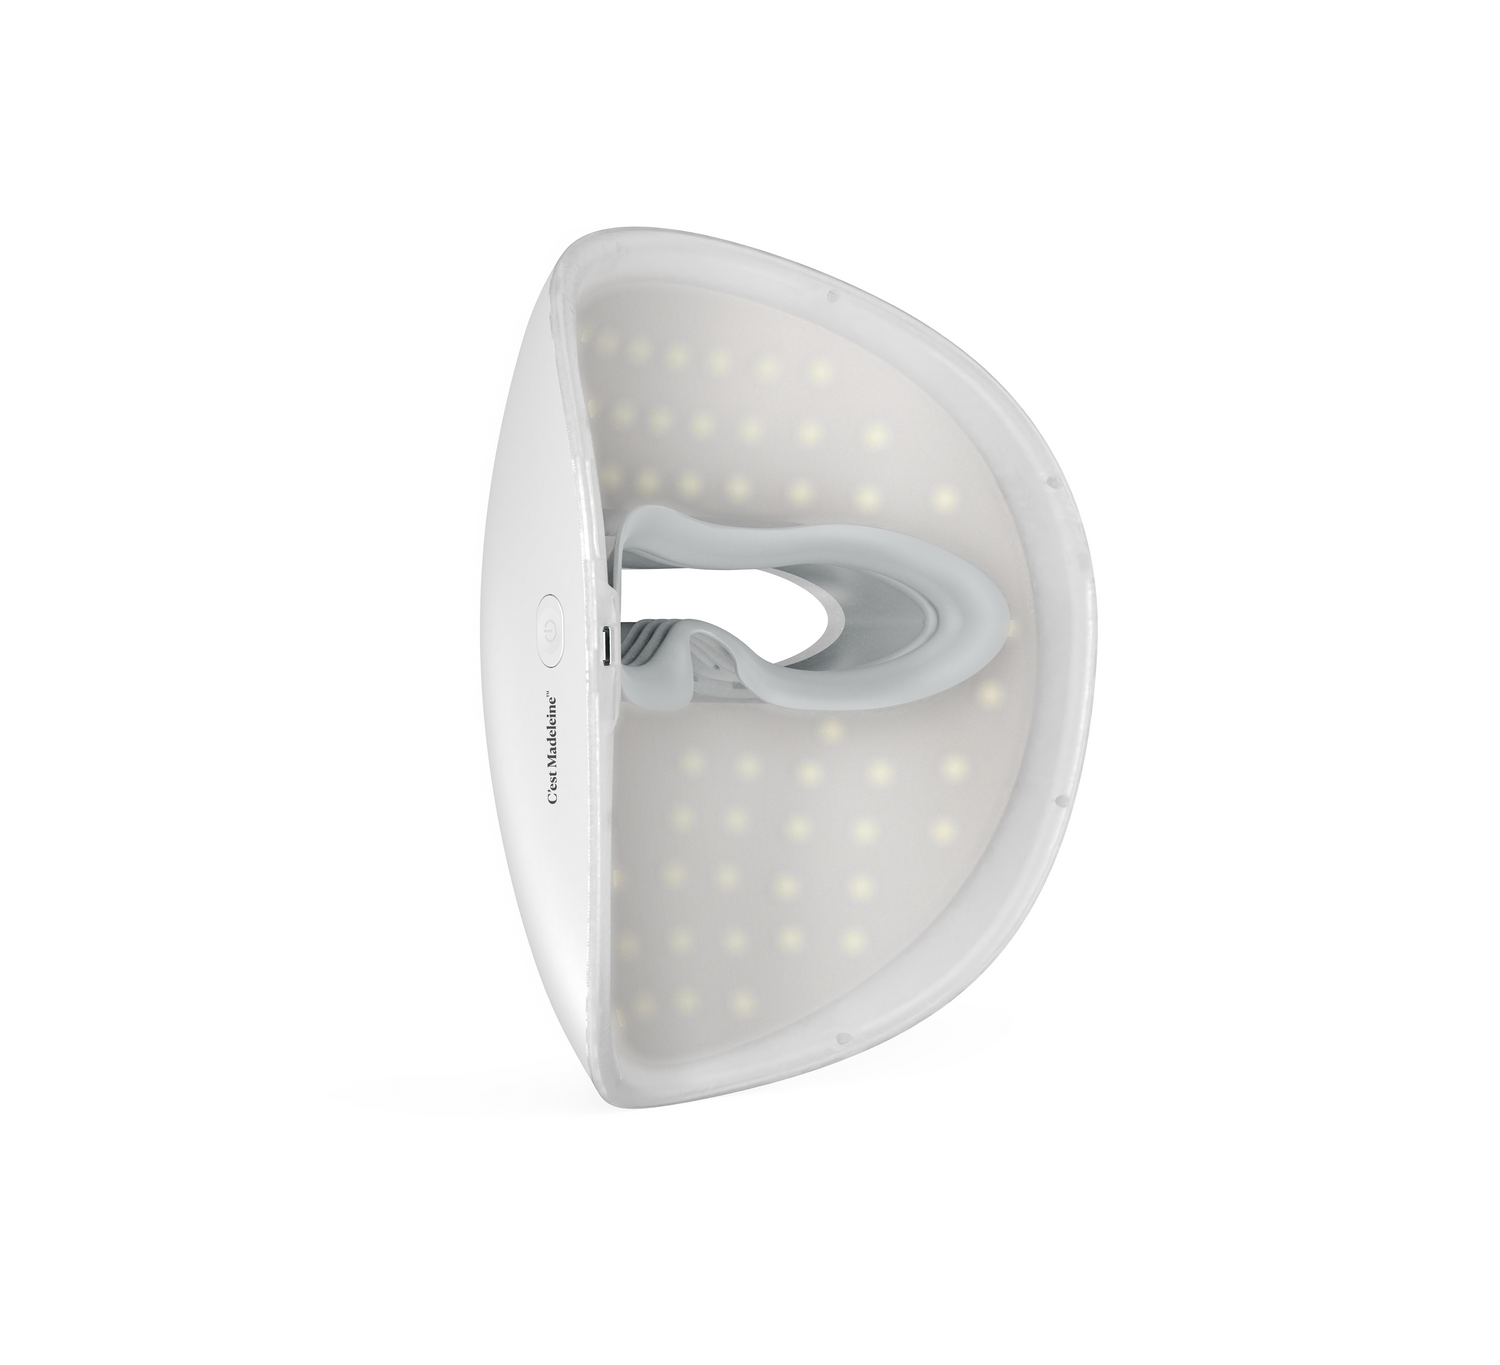 LUMIÈRE™ - The Most Advanced LED Therapy Mask